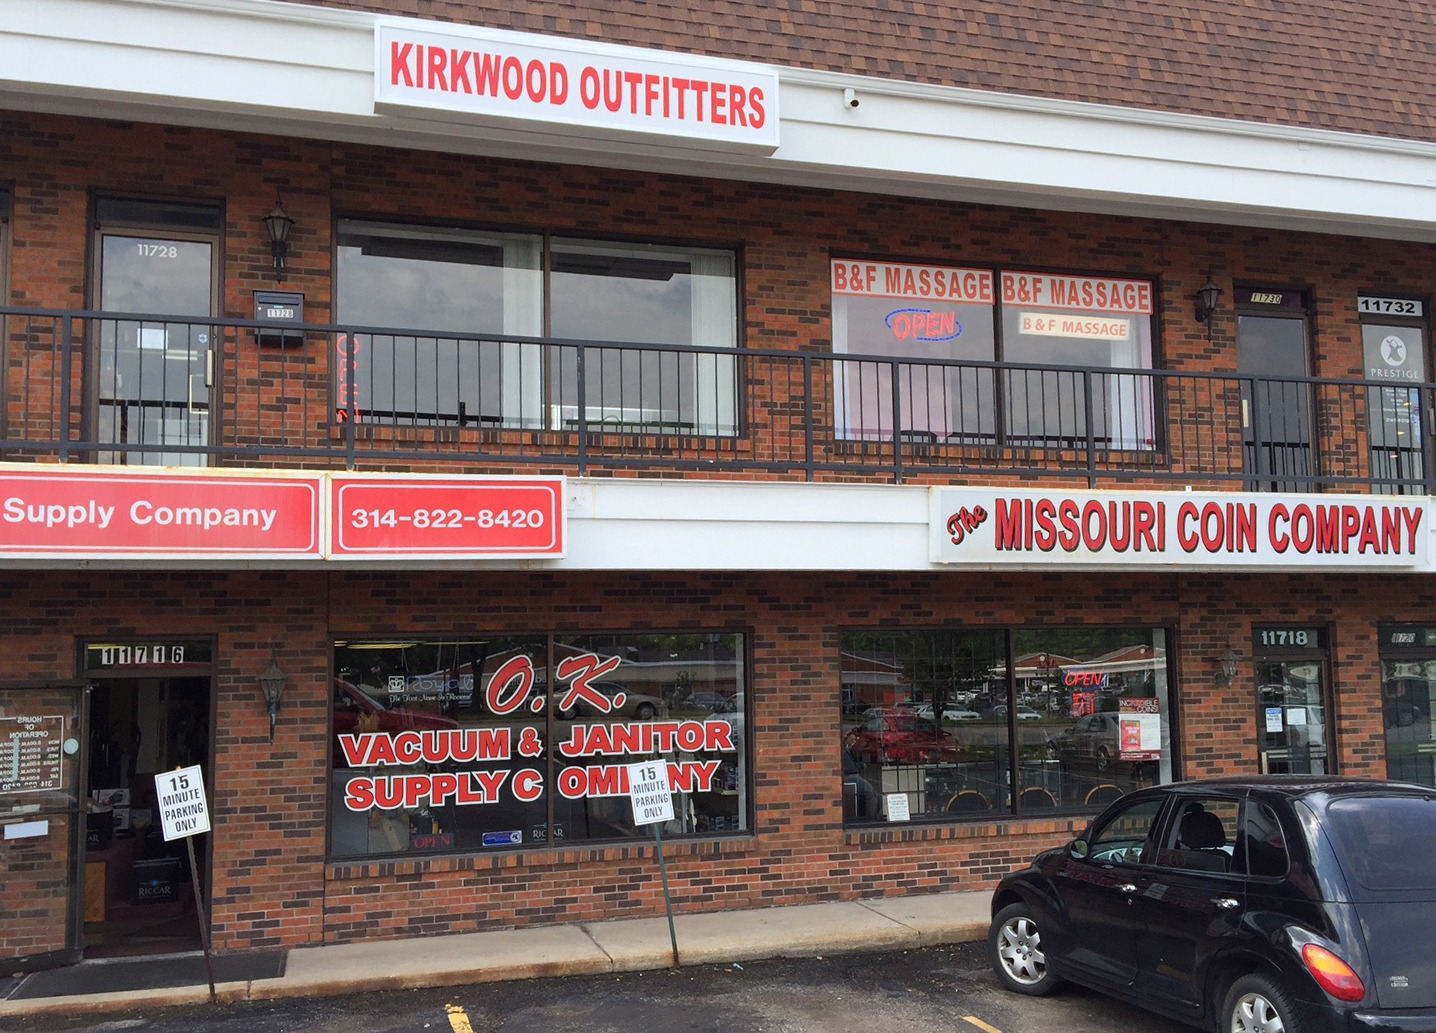 Kirkwood Outfitters Storefront